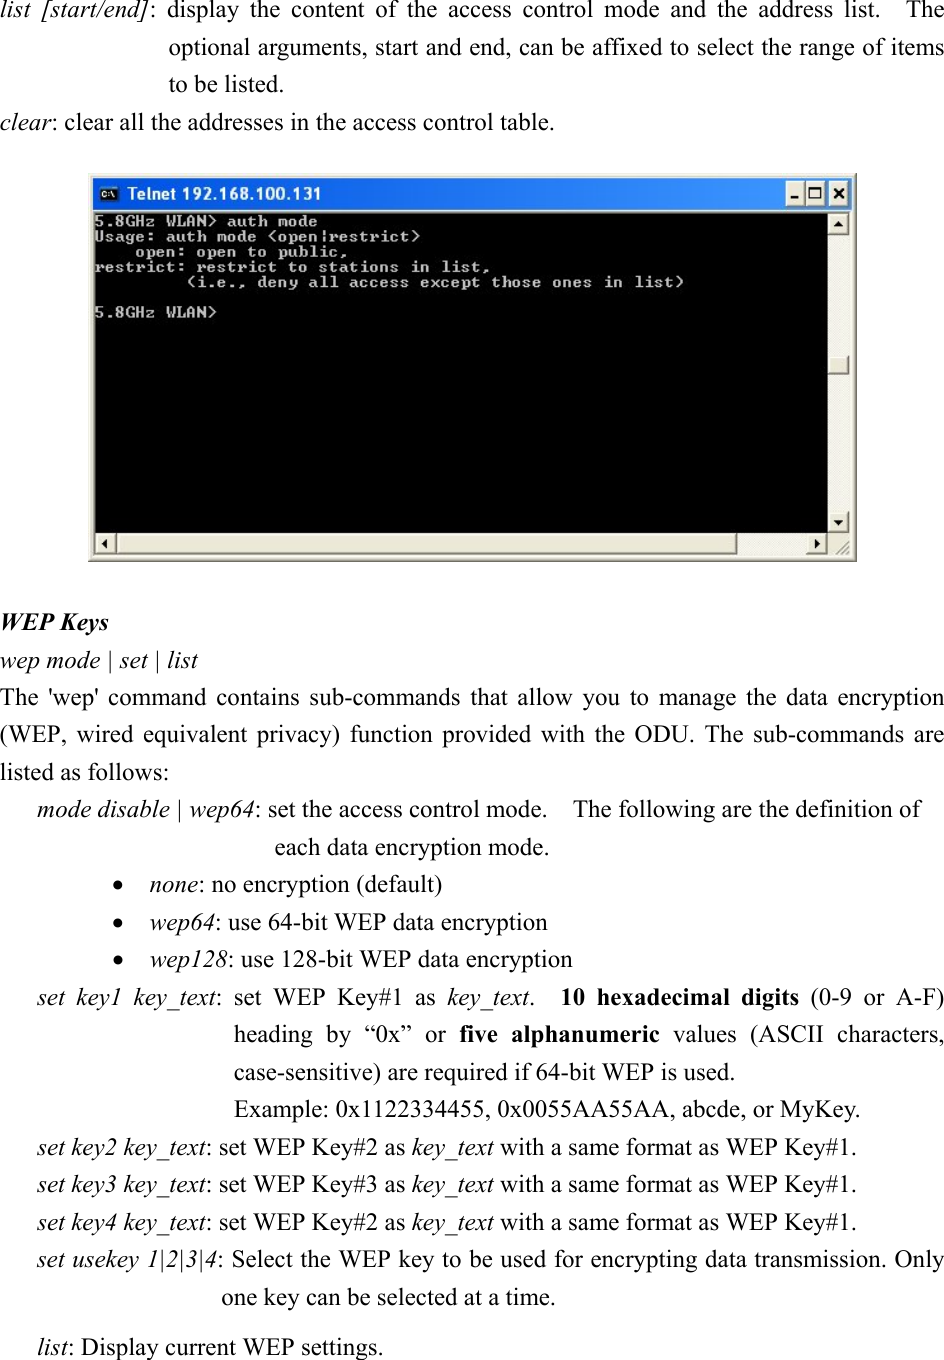 list [start/end]: display the content of the access control mode and the address list.  The optional arguments, start and end, can be affixed to select the range of items to be listed. clear: clear all the addresses in the access control table.   WEP Keys wep mode | set | list The &apos;wep&apos; command contains sub-commands that allow you to manage the data encryption (WEP, wired equivalent privacy) function provided with the ODU. The sub-commands are listed as follows: mode disable | wep64: set the access control mode.    The following are the definition of   each data encryption mode. •  none: no encryption (default) •  wep64: use 64-bit WEP data encryption •  wep128: use 128-bit WEP data encryption set key1 key_text: set WEP Key#1 as key_text.  10 hexadecimal digits (0-9 or A-F) heading by “0x” or five alphanumeric values (ASCII characters, case-sensitive) are required if 64-bit WEP is used.     Example: 0x1122334455, 0x0055AA55AA, abcde, or MyKey. set key2 key_text: set WEP Key#2 as key_text with a same format as WEP Key#1. set key3 key_text: set WEP Key#3 as key_text with a same format as WEP Key#1. set key4 key_text: set WEP Key#2 as key_text with a same format as WEP Key#1. set usekey 1|2|3|4: Select the WEP key to be used for encrypting data transmission. Only one key can be selected at a time. list: Display current WEP settings. 